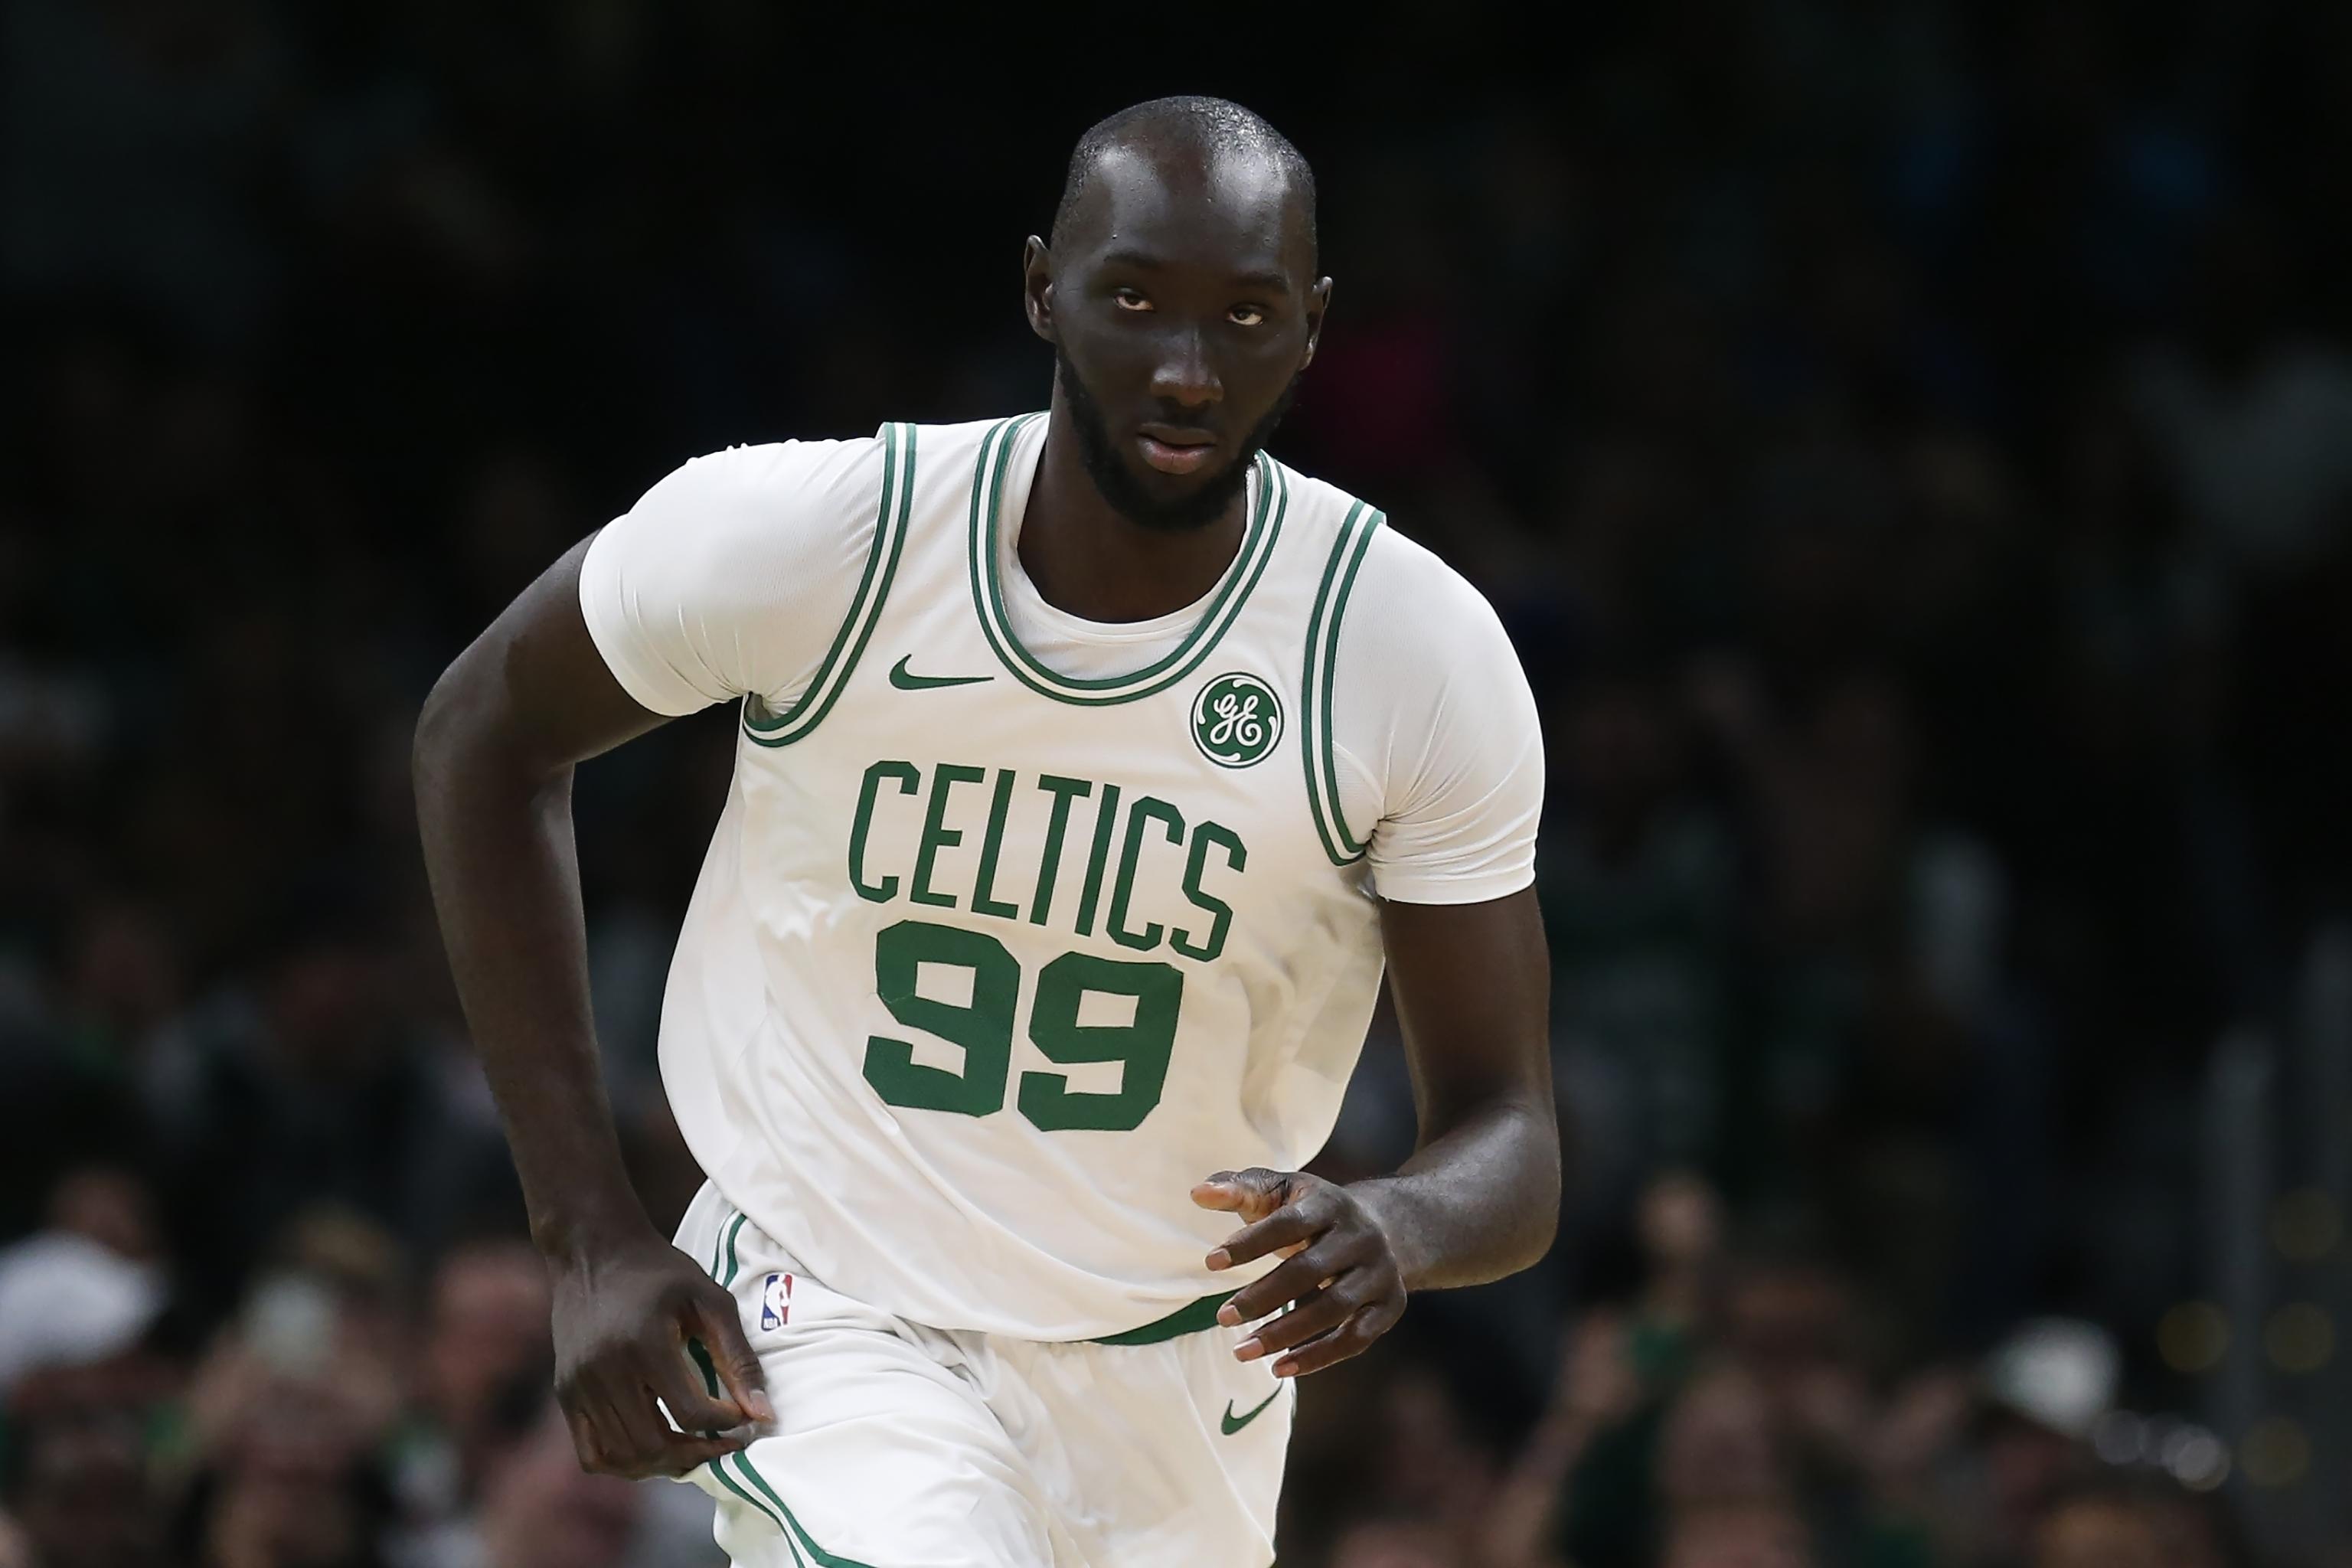 Tacko Fall and Tremont Waters return to Celtics on two-way deals